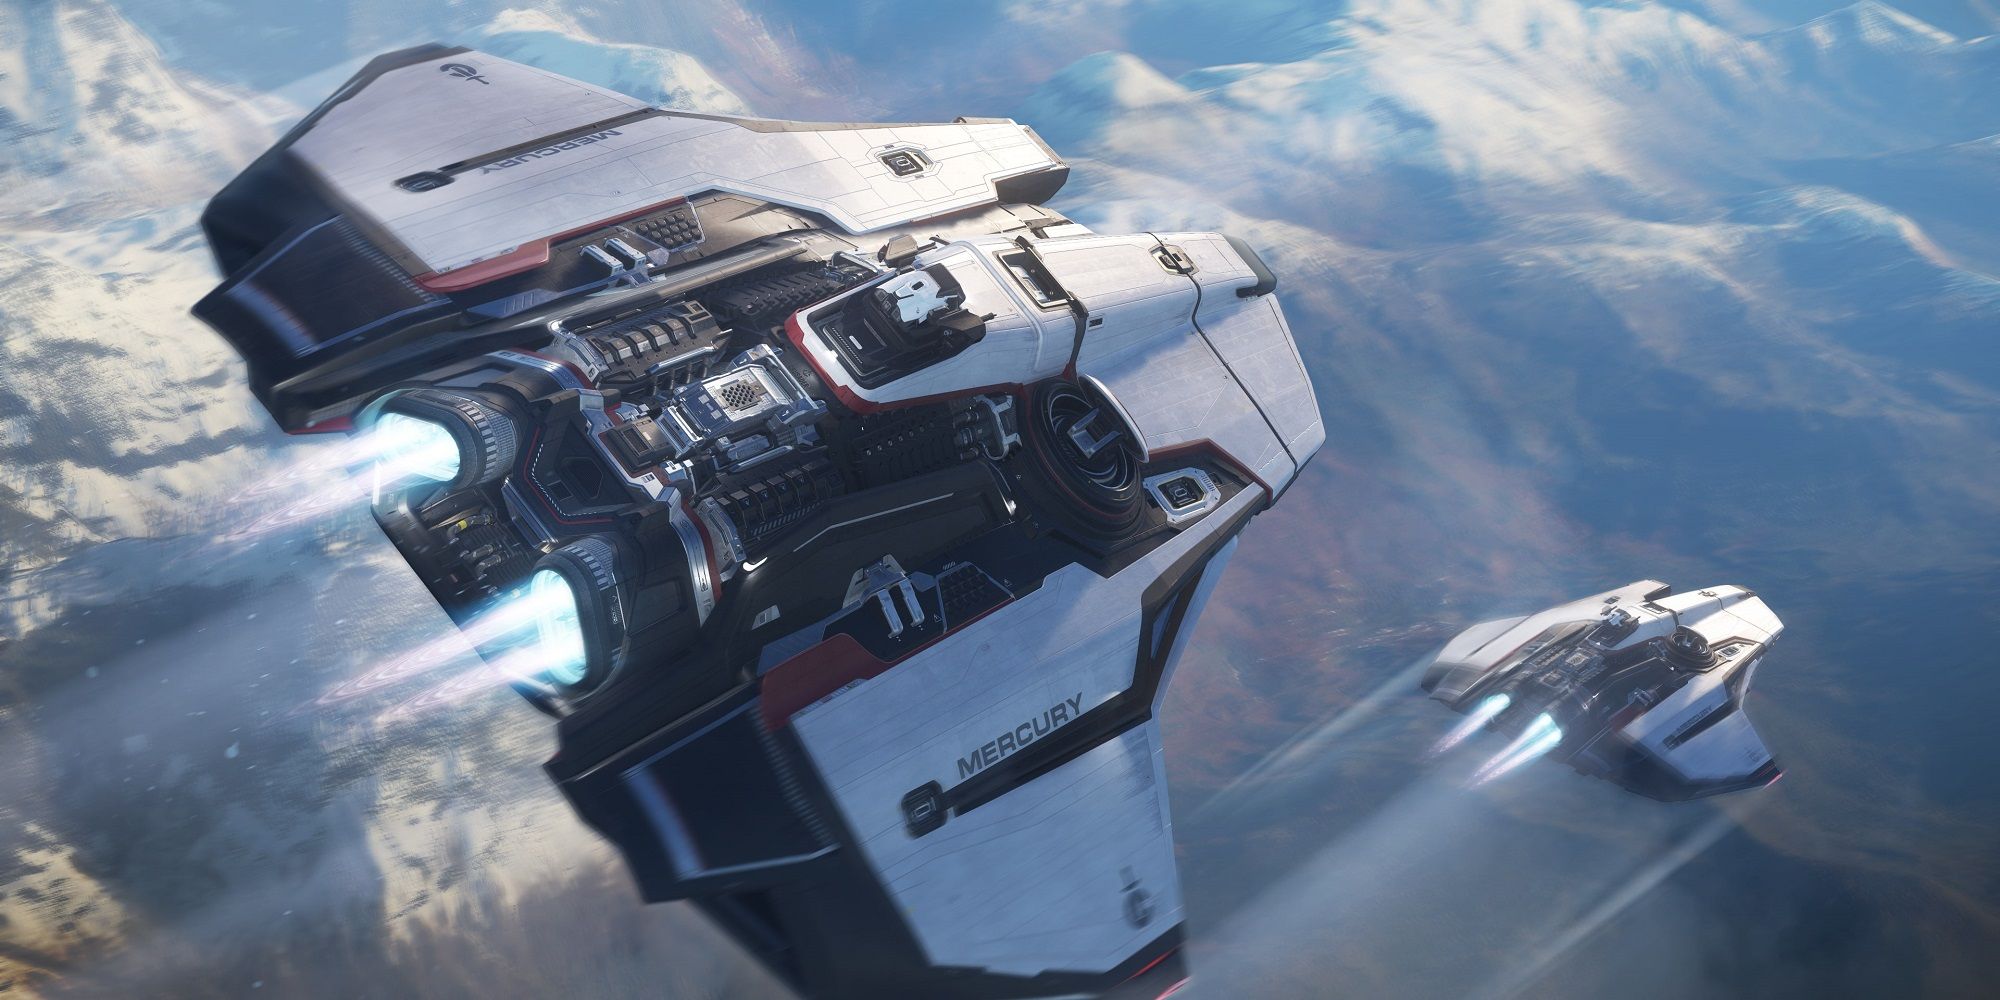 List of Best Ships in Star Citizen By Category - 2023